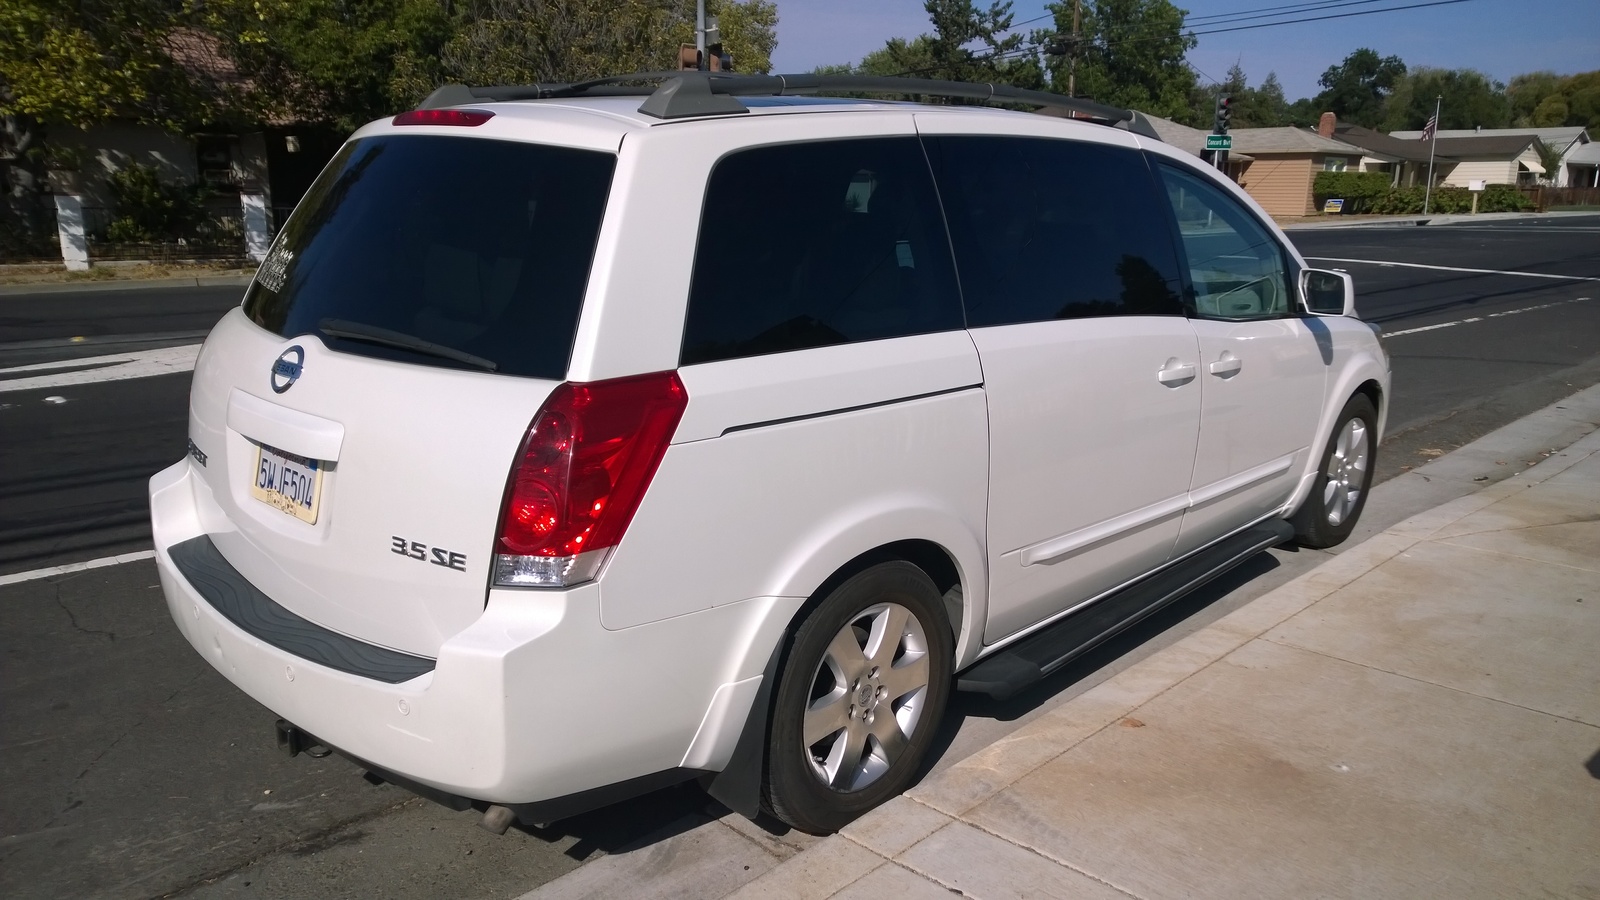 2006 Nissan quest 3.5 s special edition reviews #10